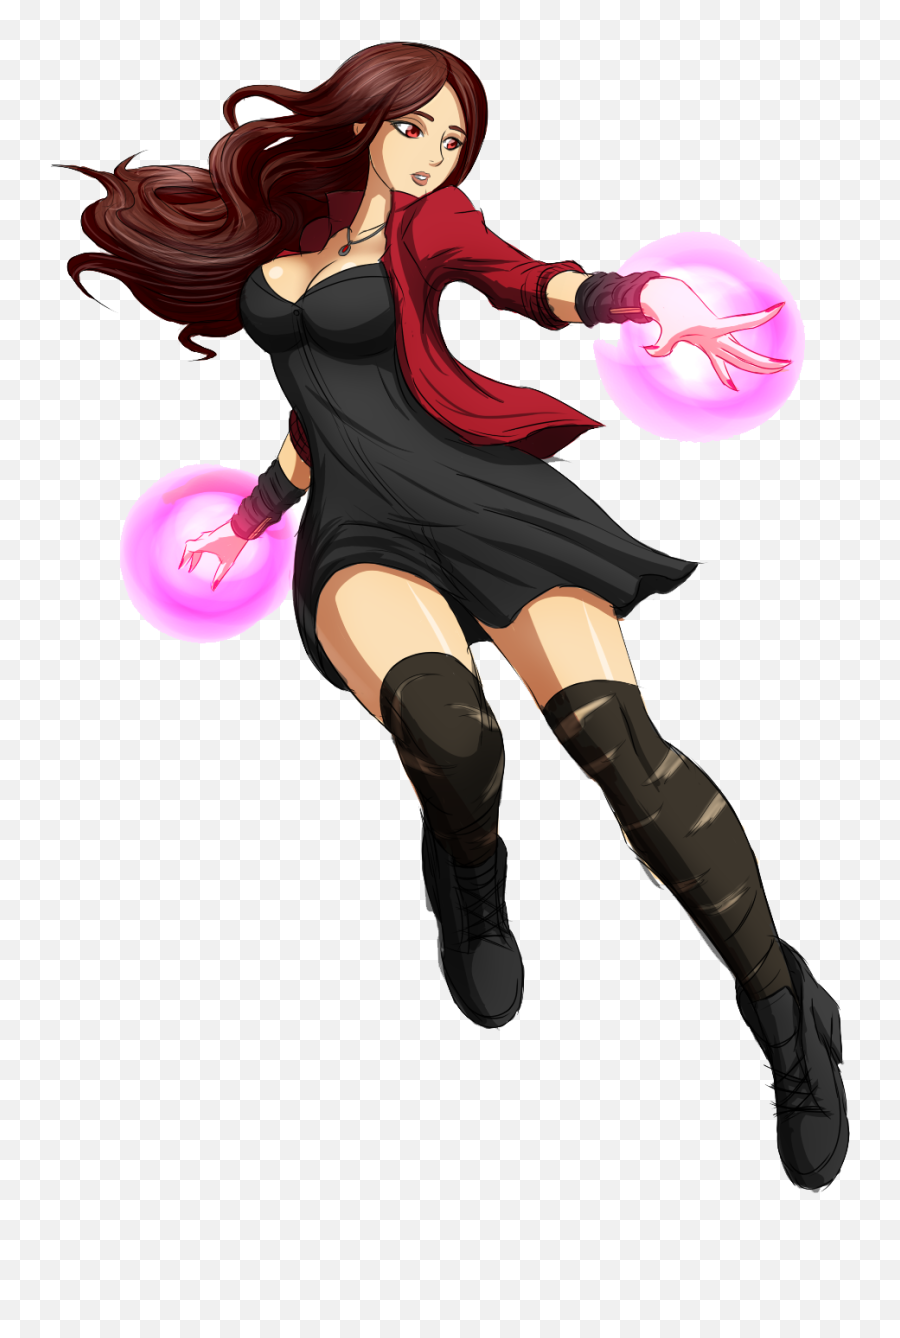 Download Scarlet Witch Free Hq Png Image Freepngimg - Scarlet Witch Avengers Cartoon,Witch Transparent Background